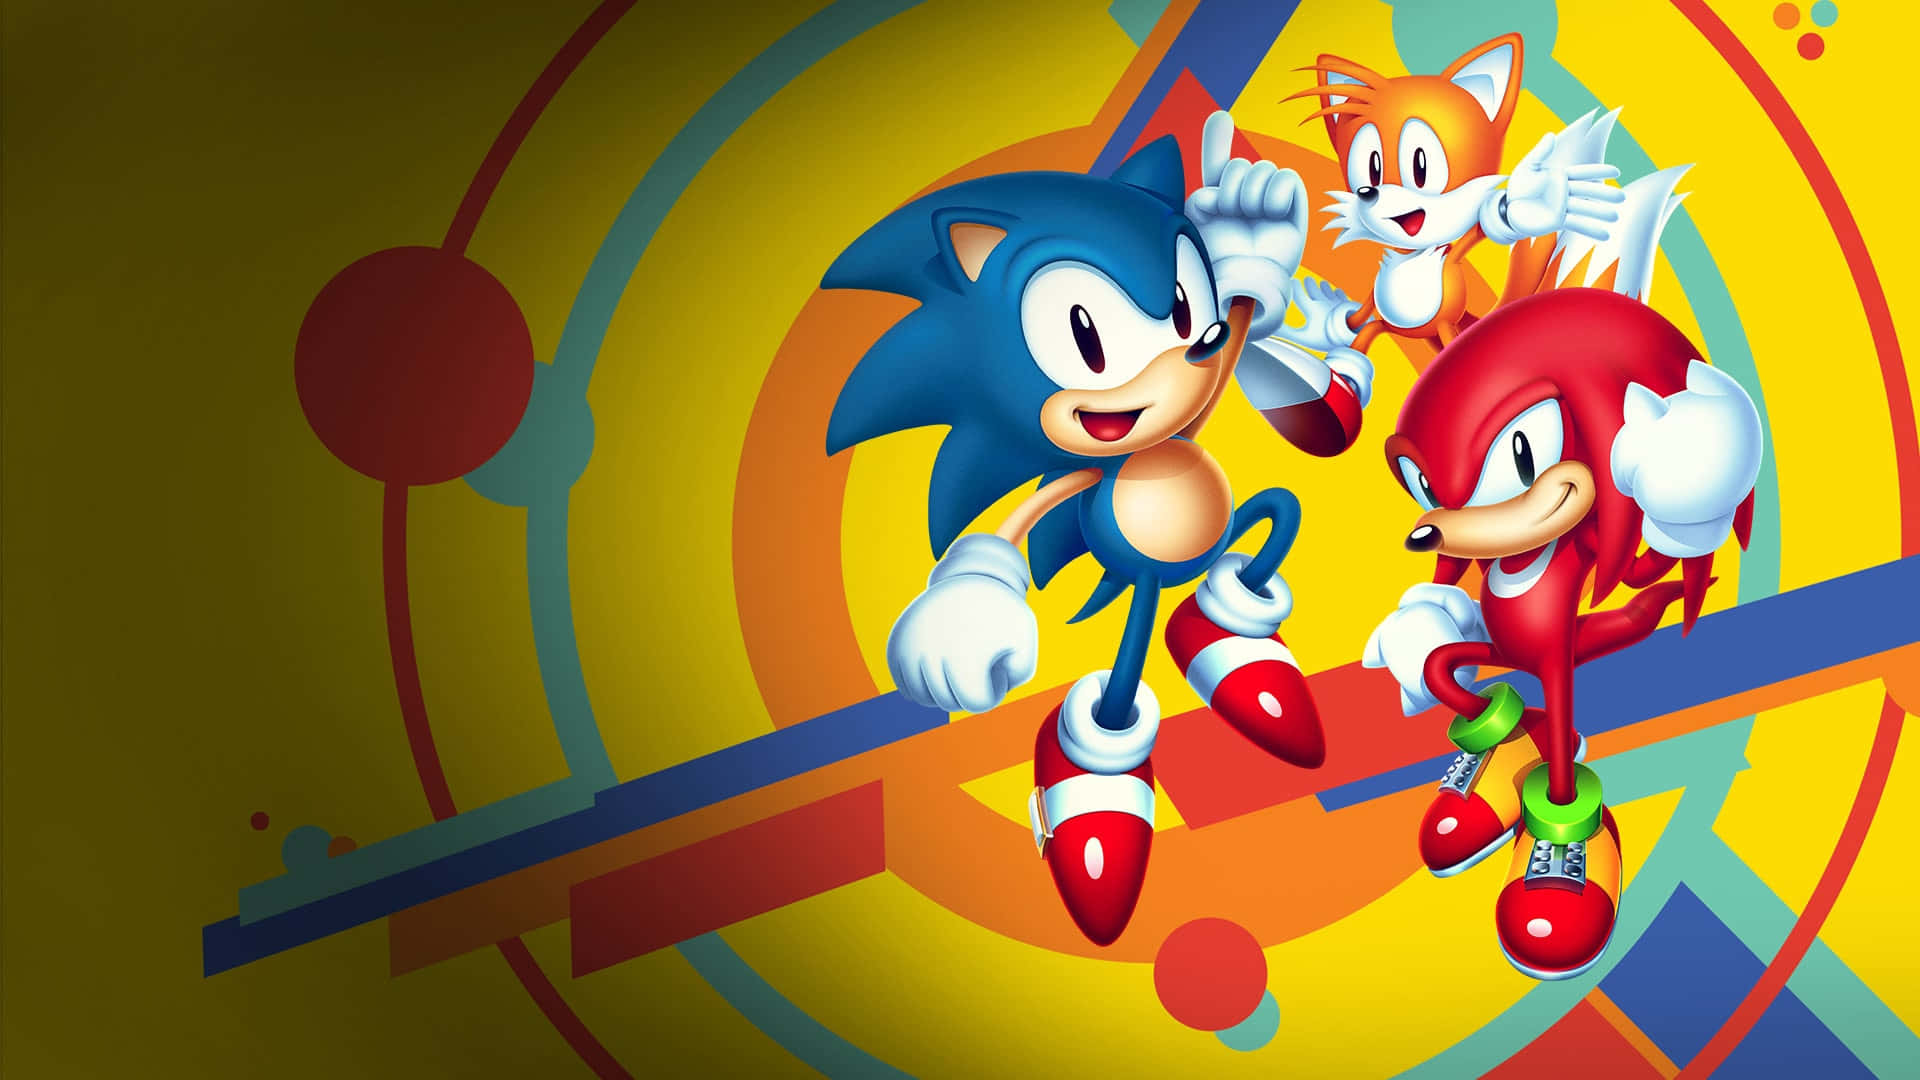 Sonic The Hedgehog And His Friends Are Standing On A Colorful Background